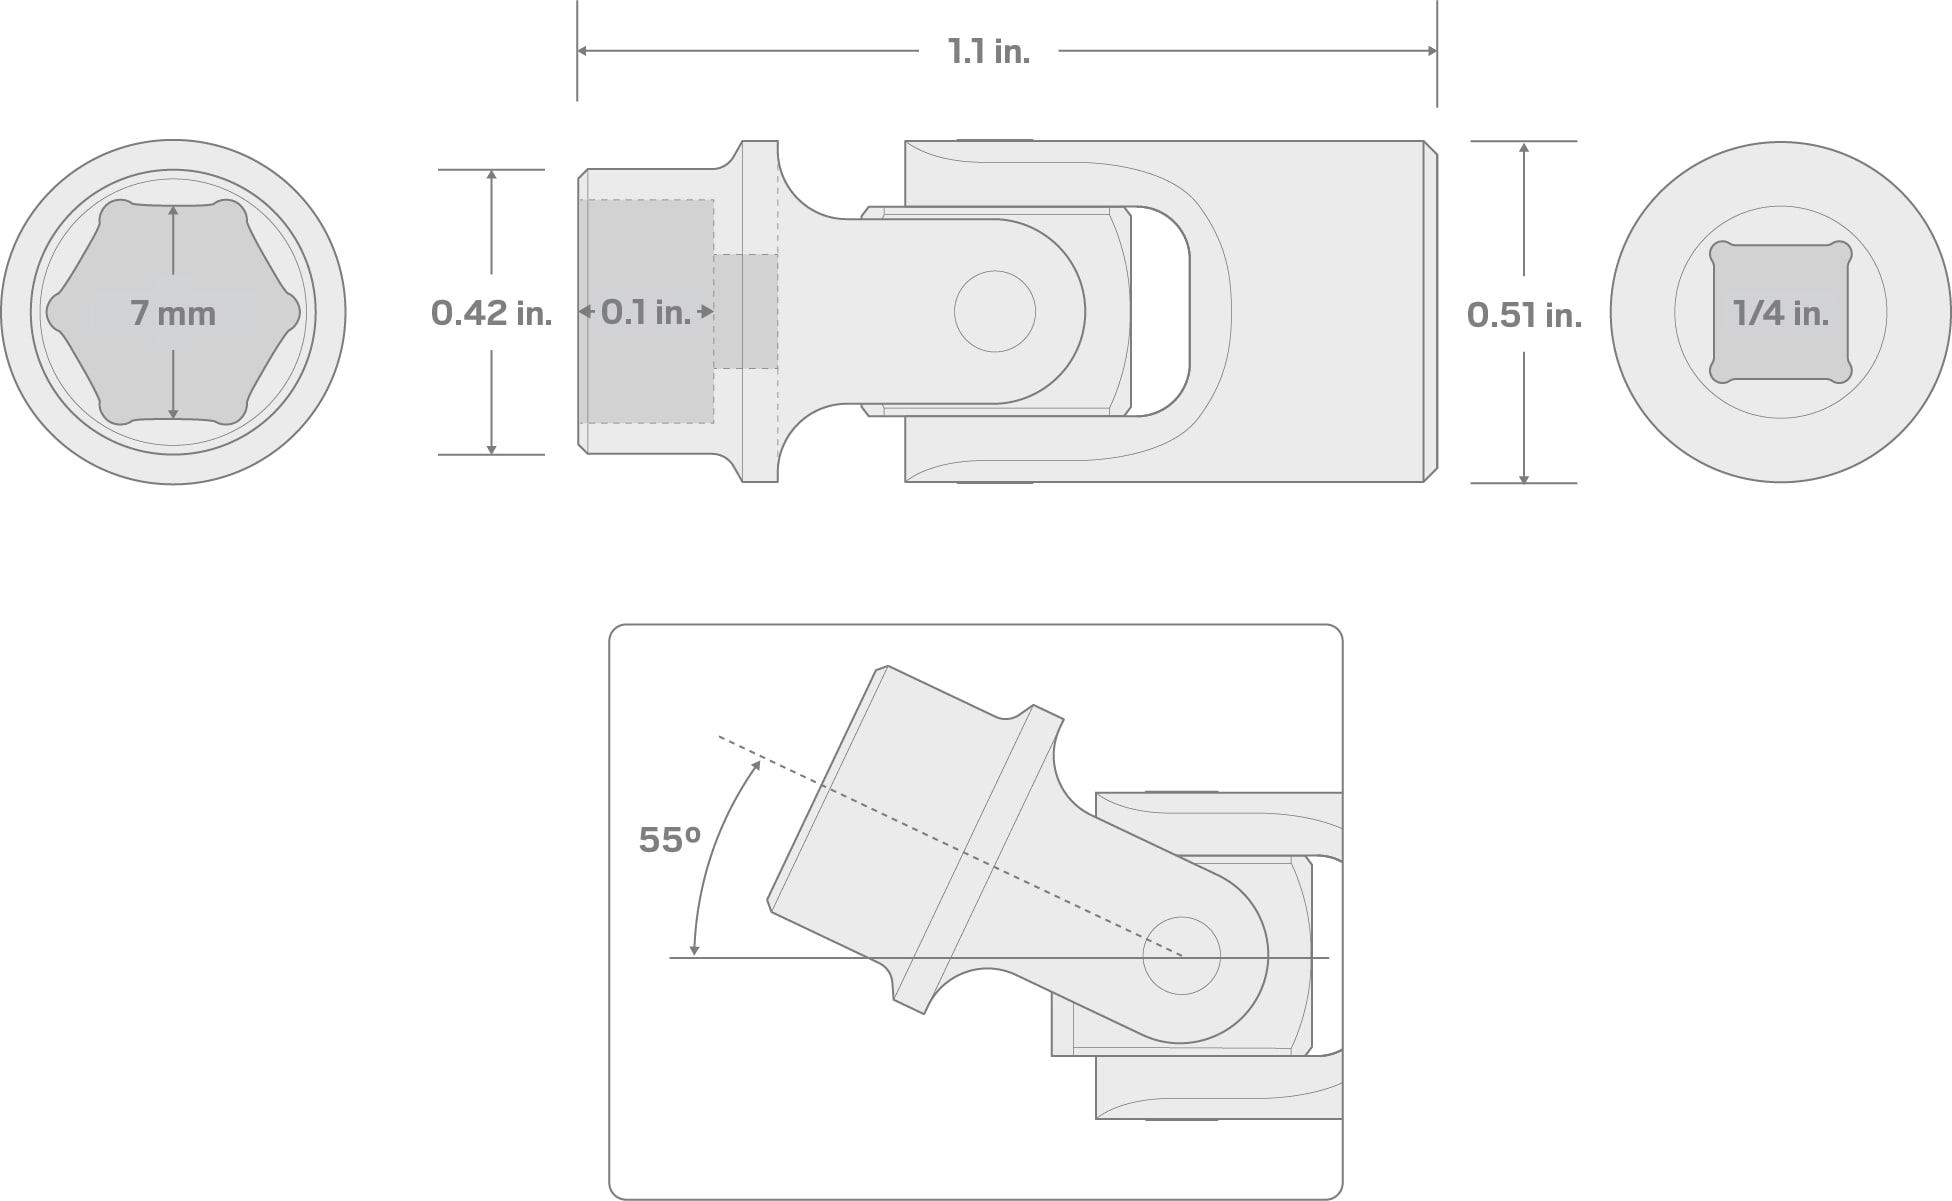 Specs for 1/4 Inch Drive x 7 mm Universal Joint Socket